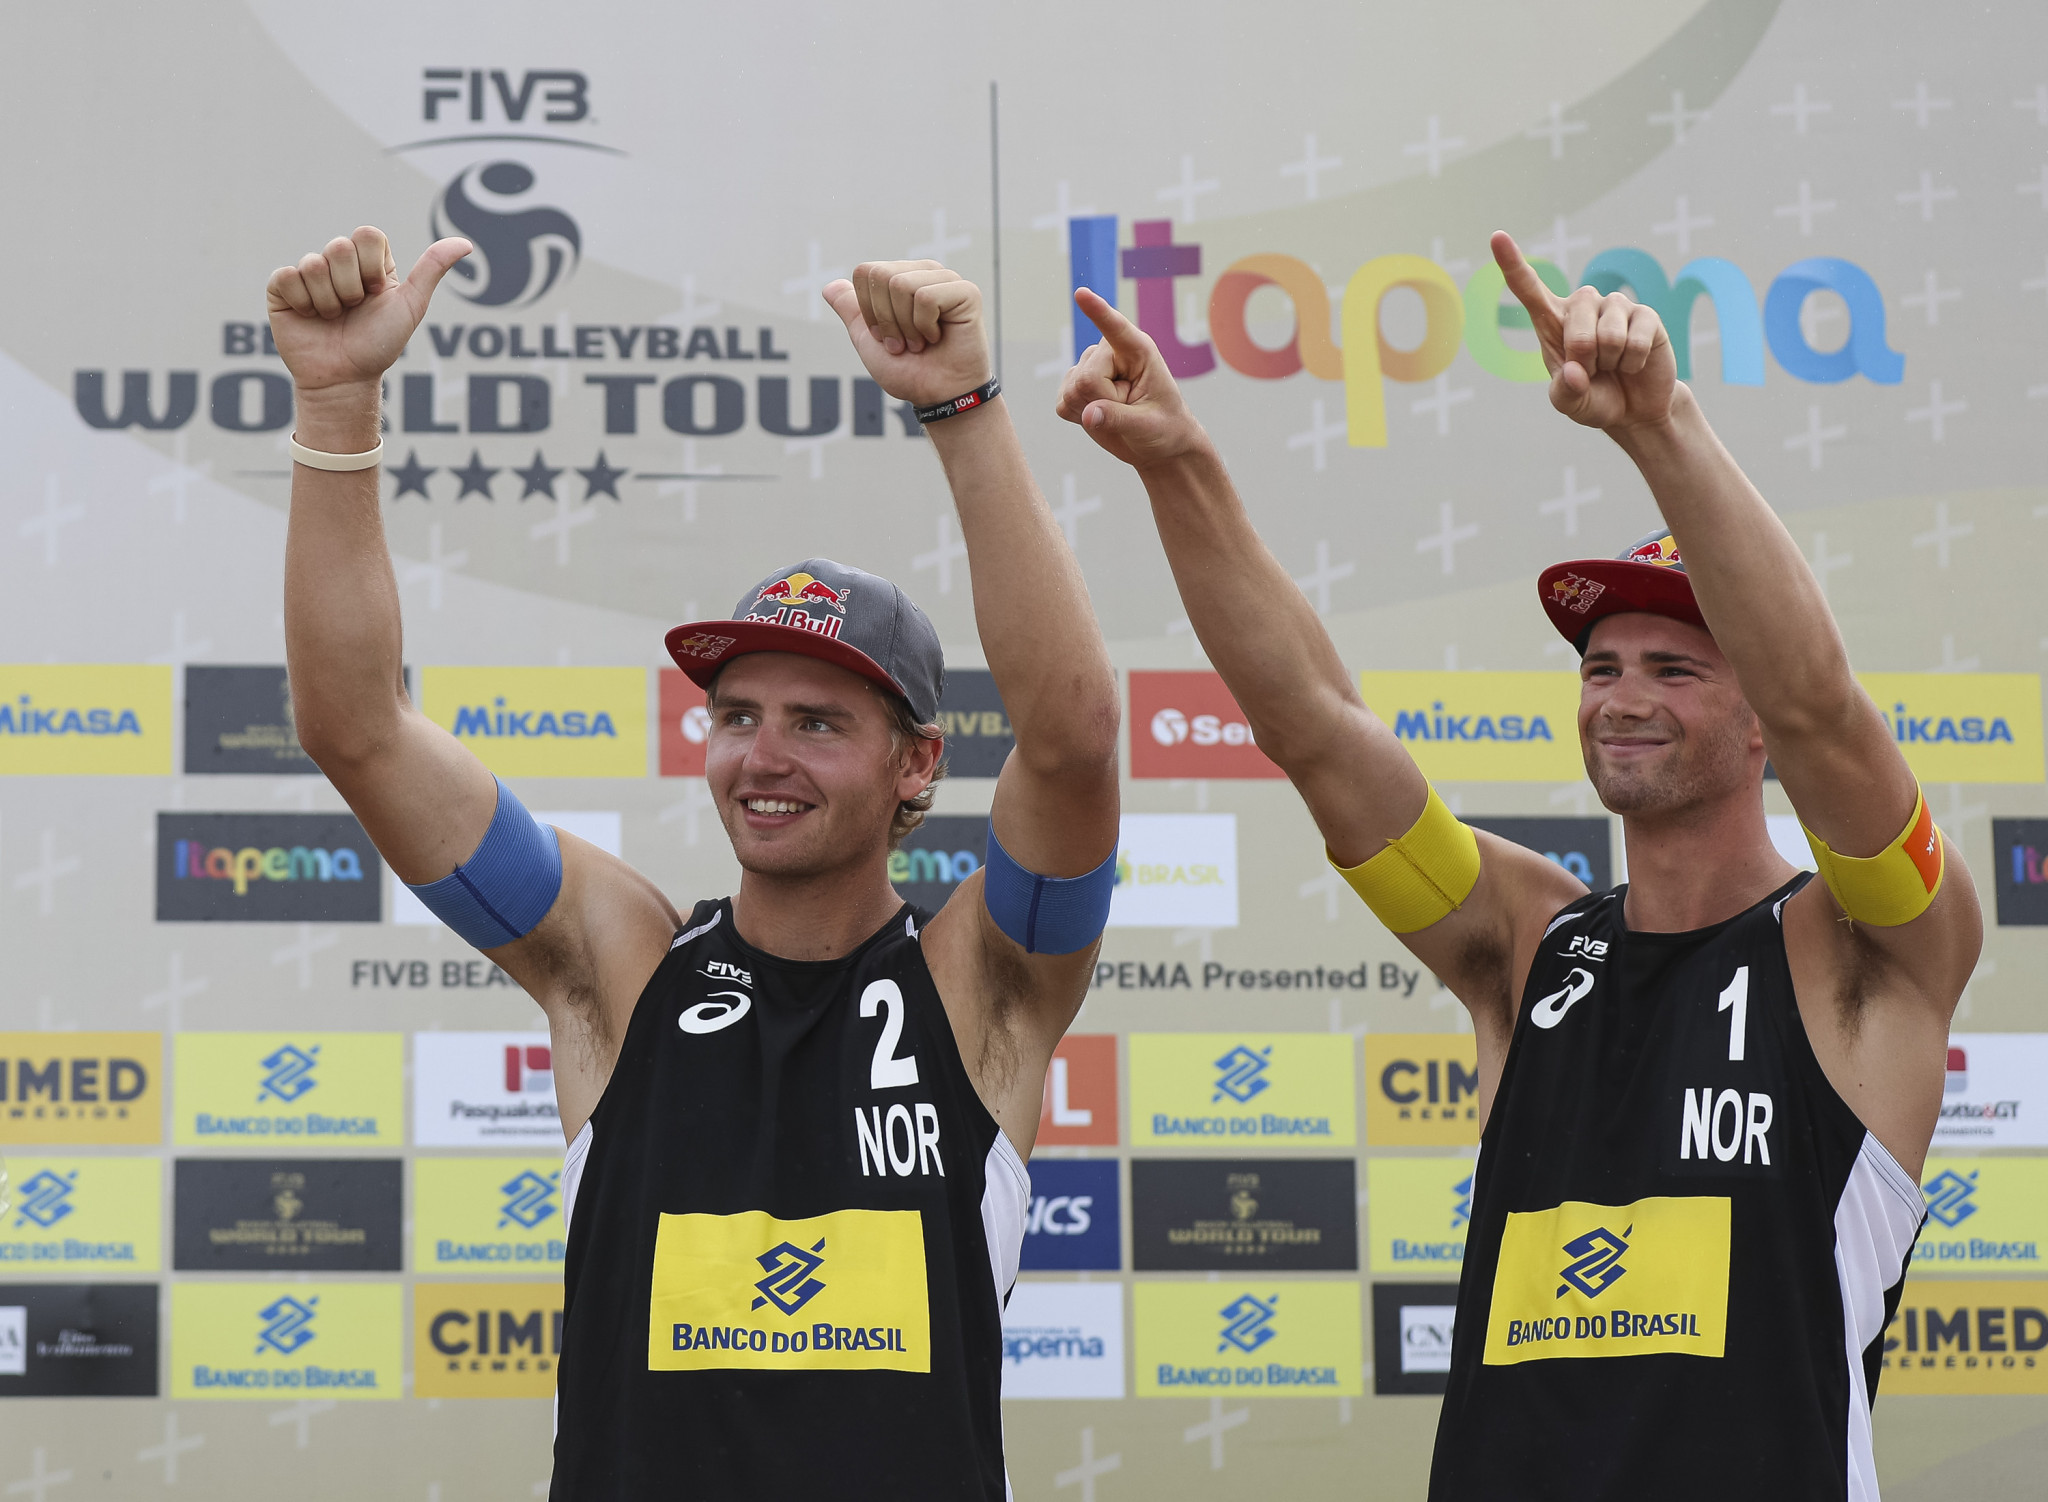 Norway's Anders Mol and Christian Sørum will be out to secure a third straight World Tour title ©Getty Images